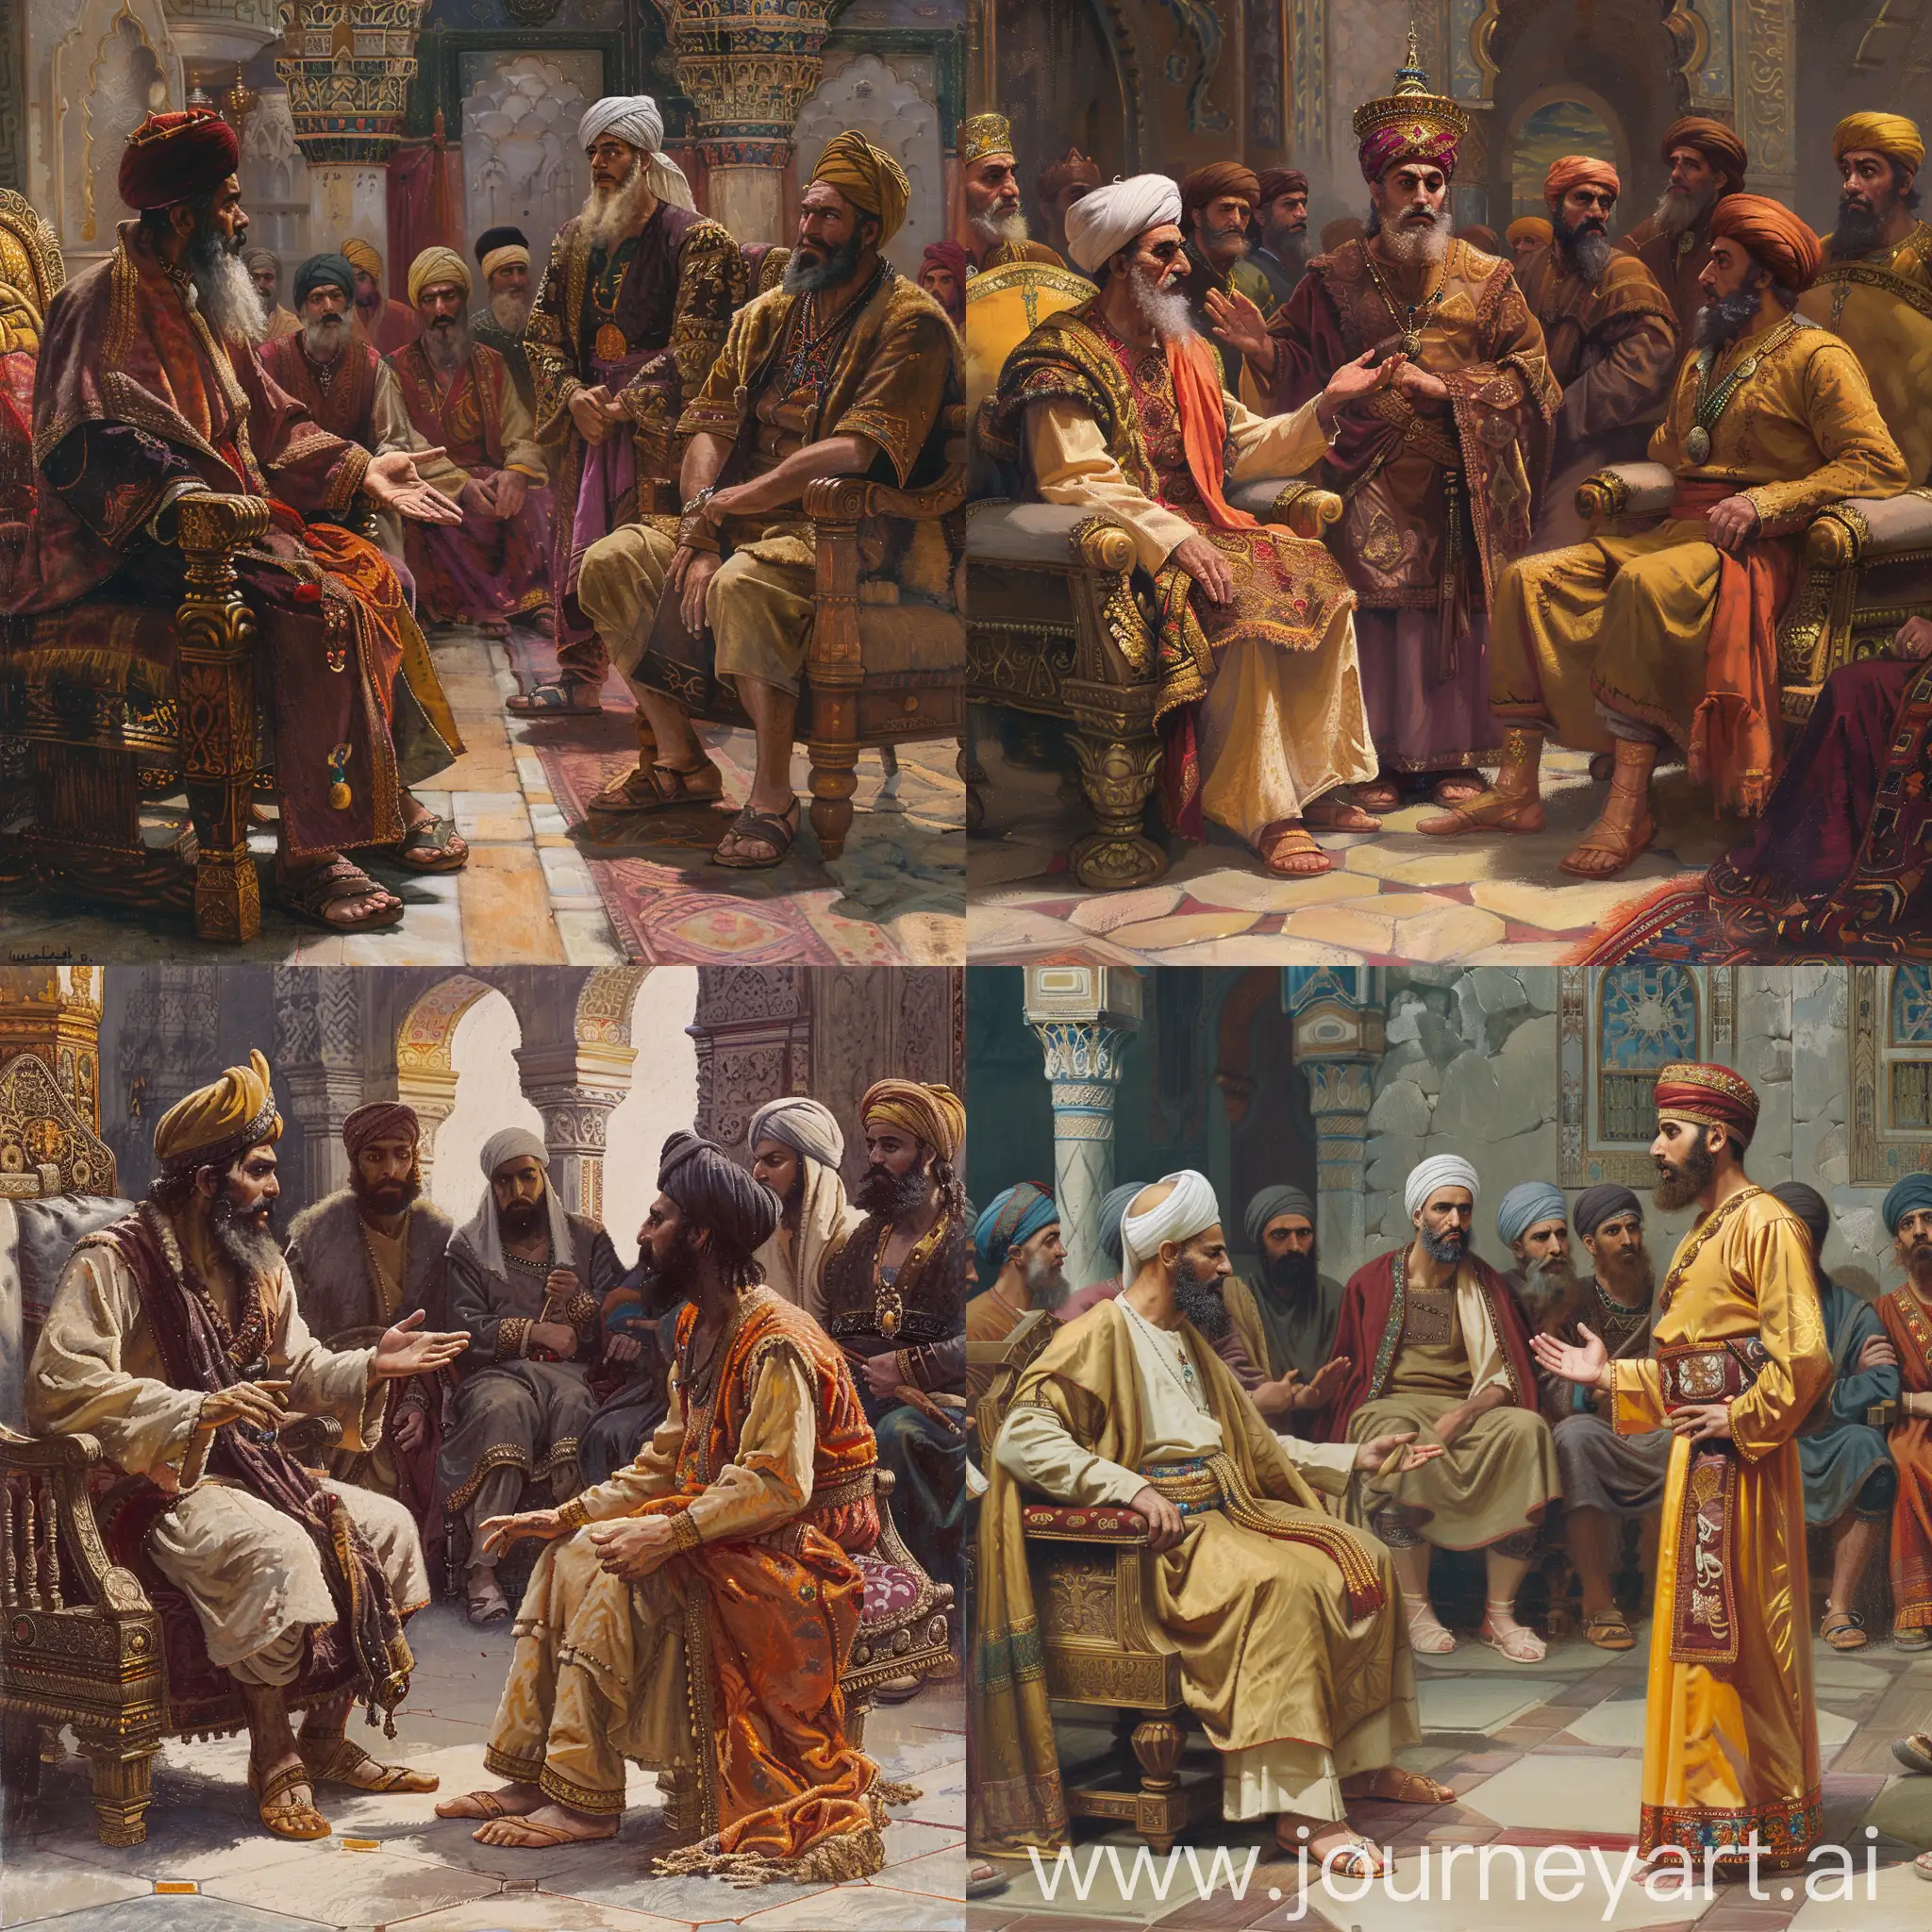 Year is 1500 CE. Imagine the court of a muslim king. The muslim king 40 years old is sitting on a throne and his son 20 years old standing in front of him. Some argument is going on between the two of them. Other courtiers sitting in the background are watching them.